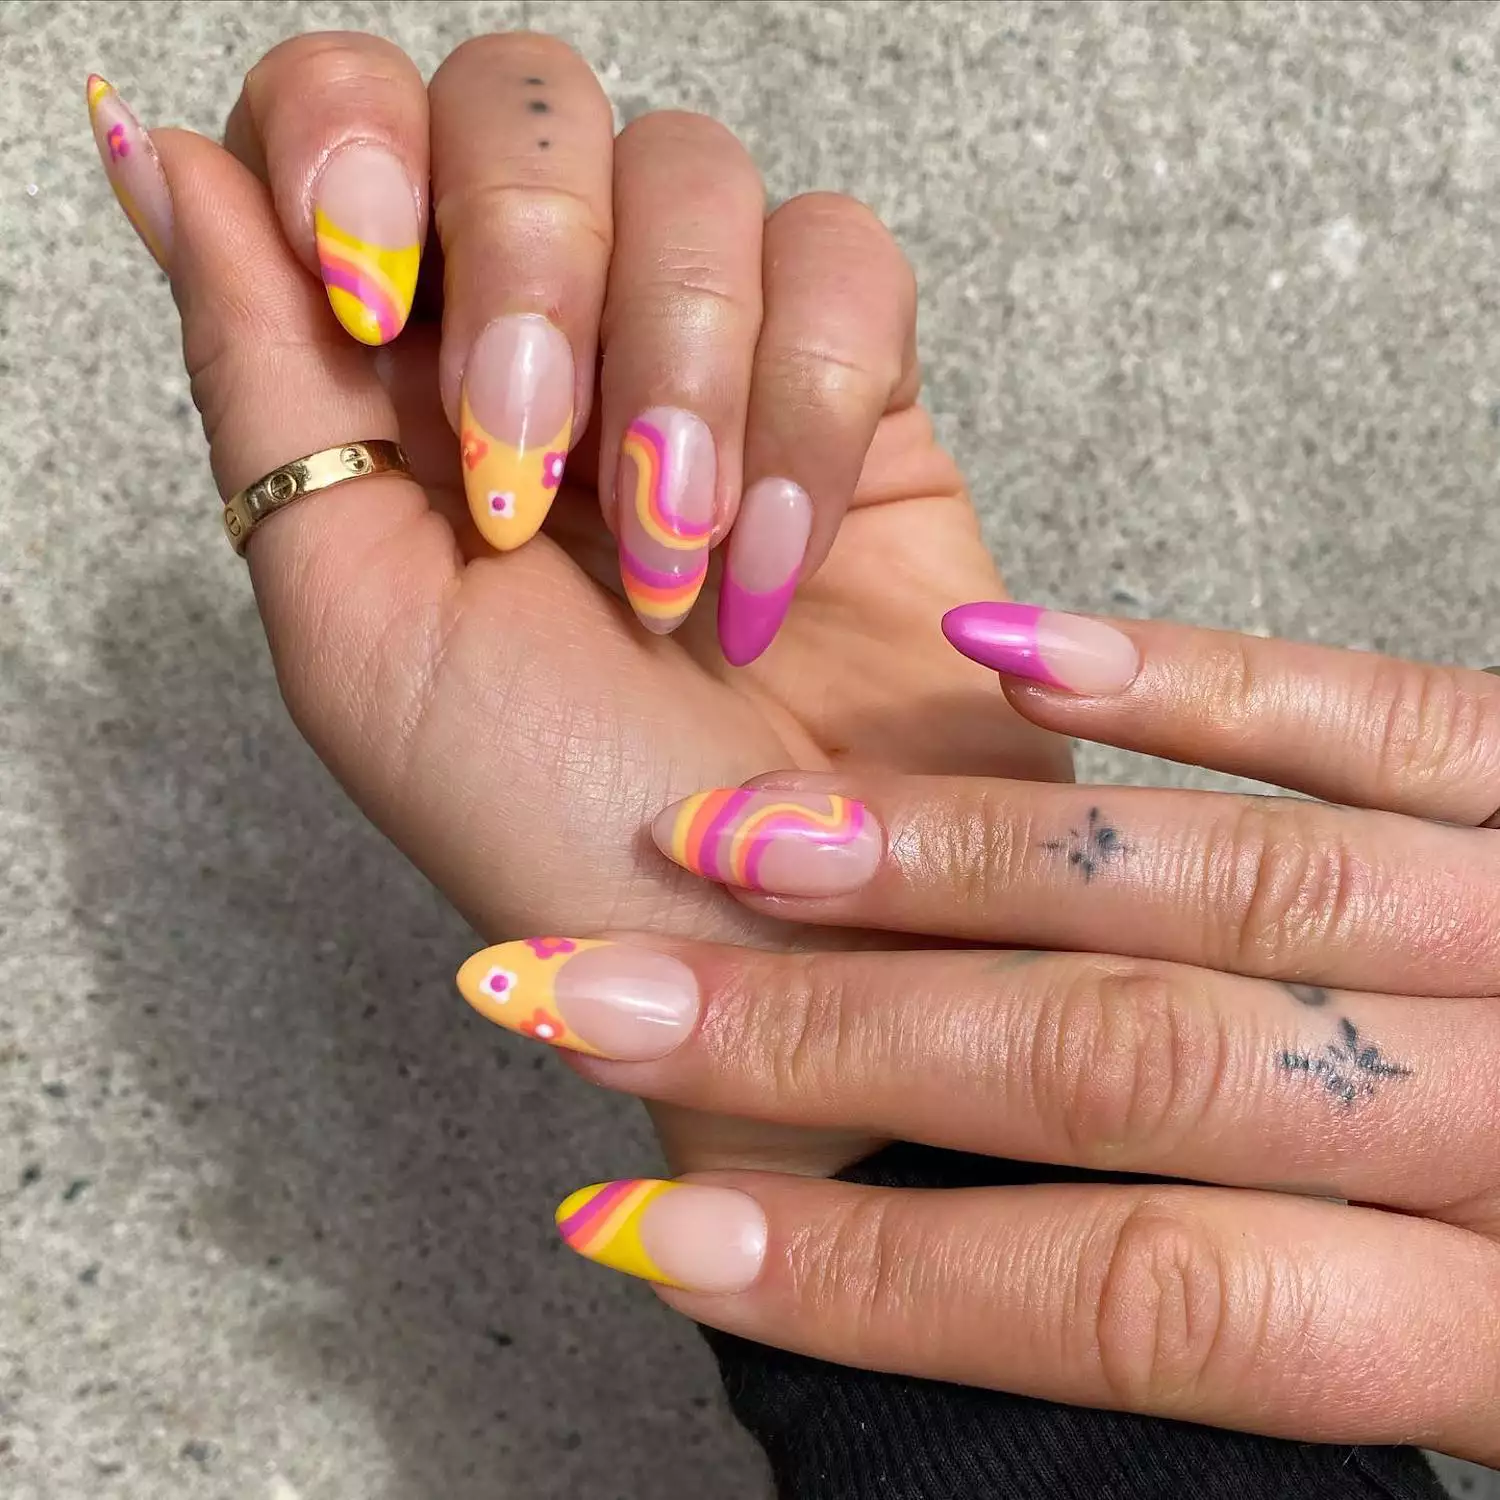 Manicure with assorted pink and yellow wave, floral, and French tip designs